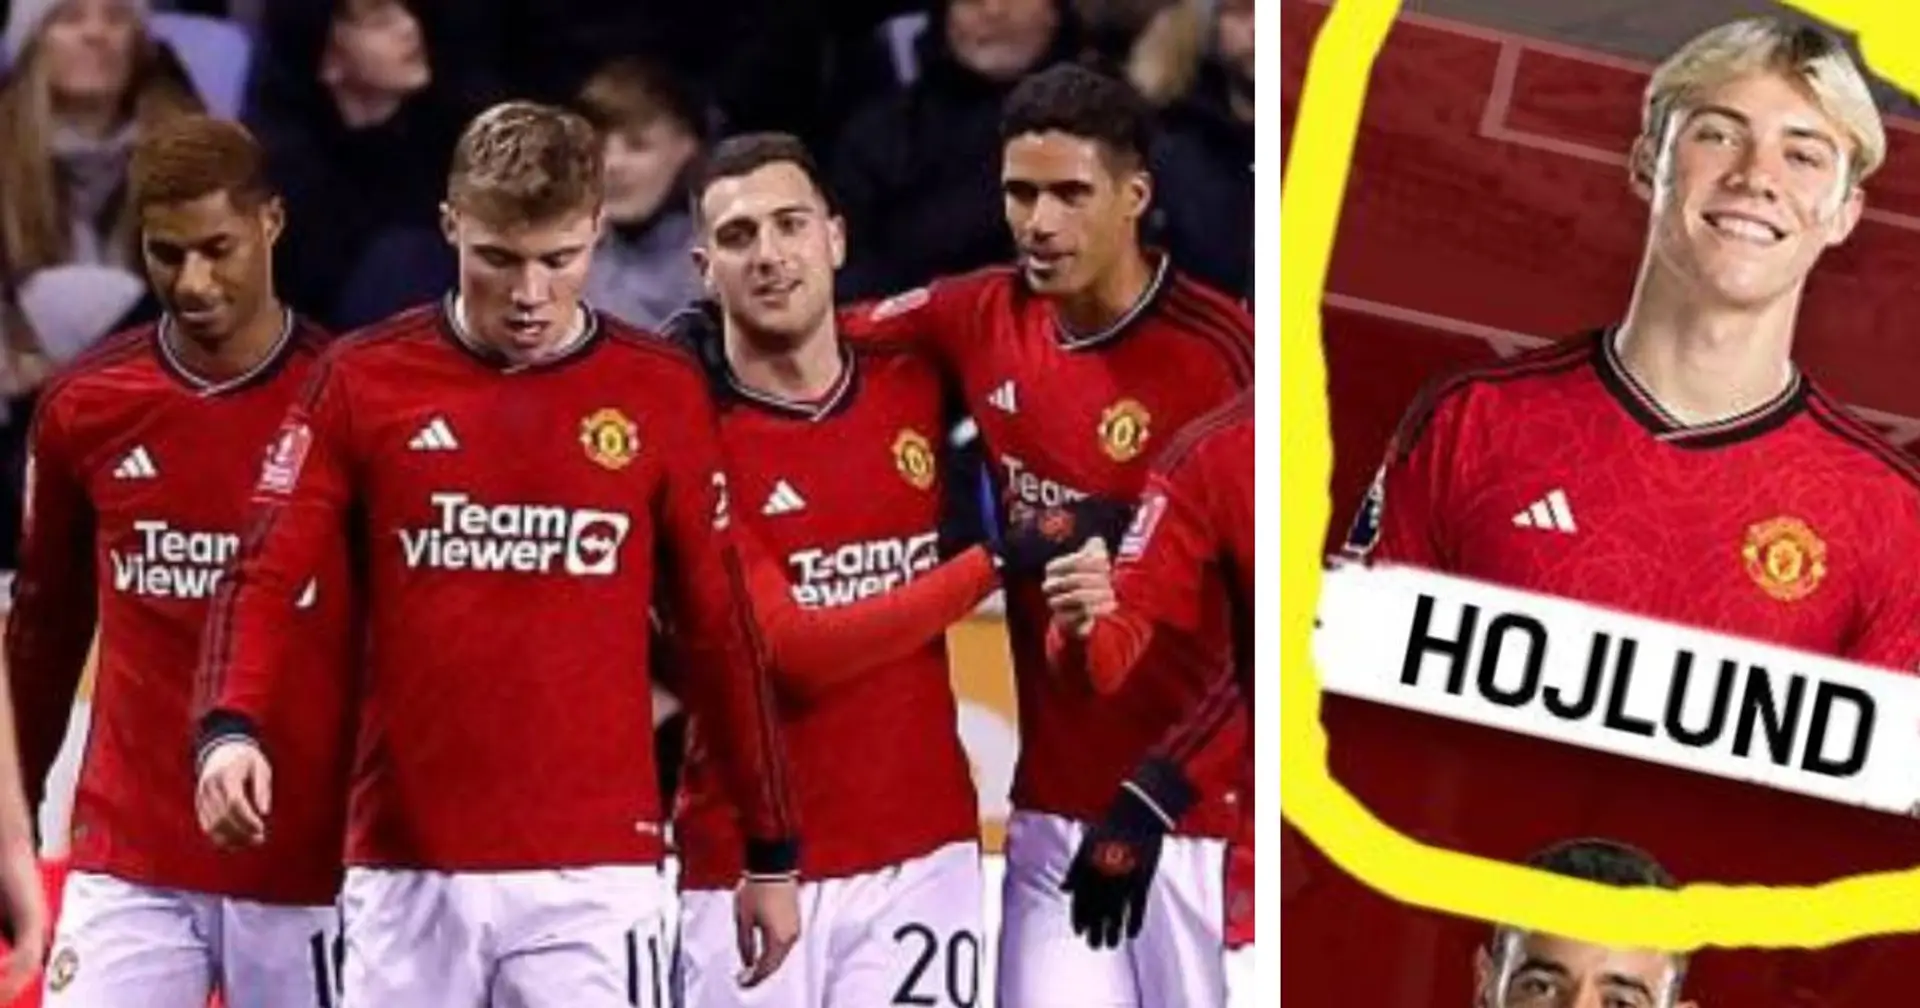 Man United's biggest weakness in Wigan Athletic win shown in lineup — 3 players make it